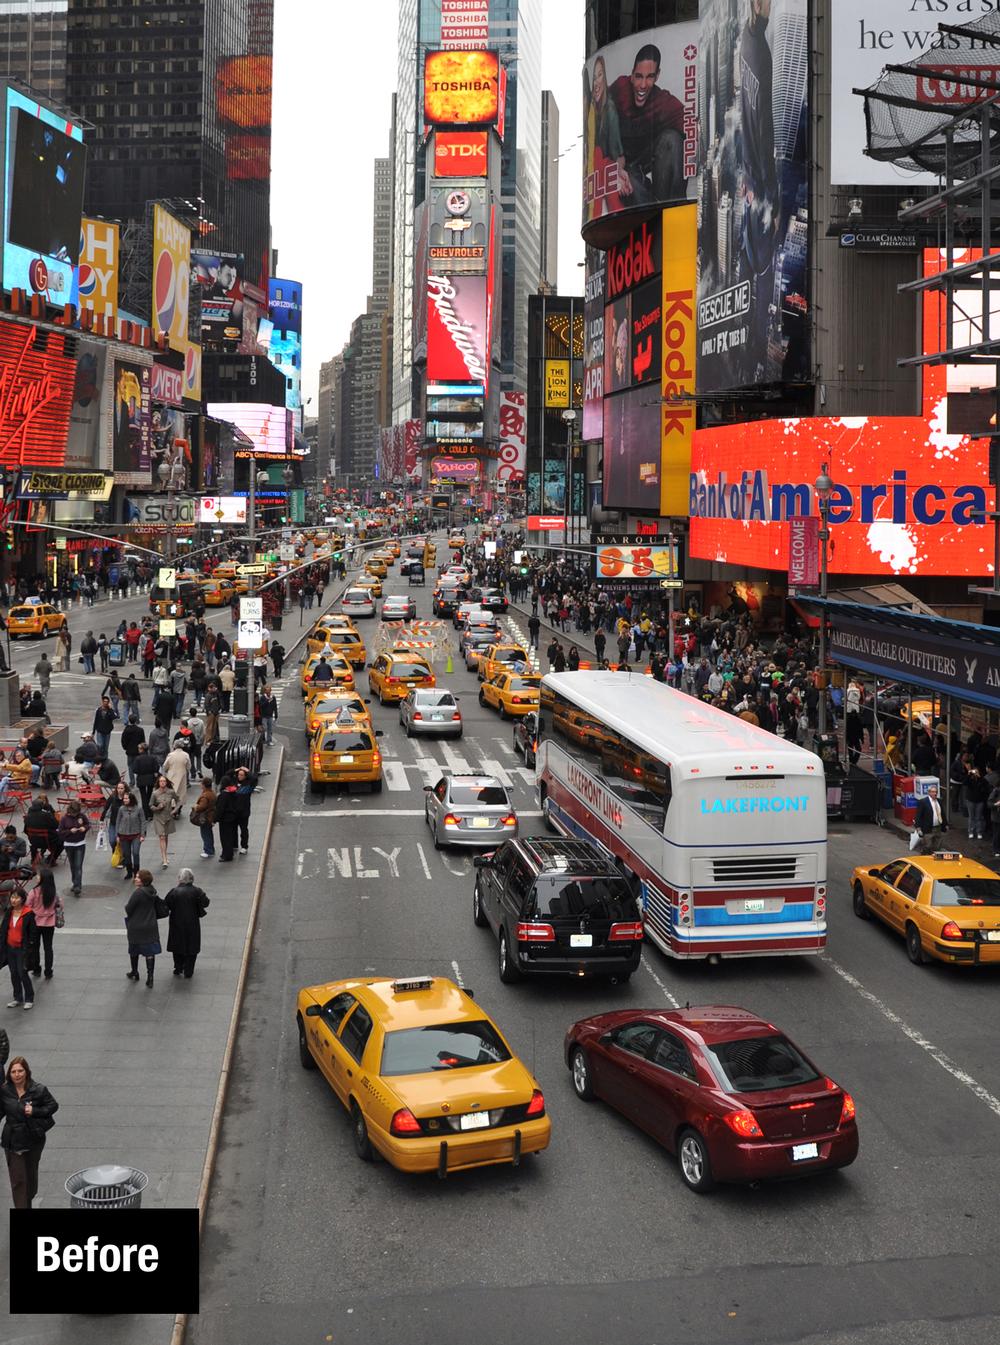 Times Square in New York City has been pedestrianised and now attracts café seating, concerts and even yoga classes